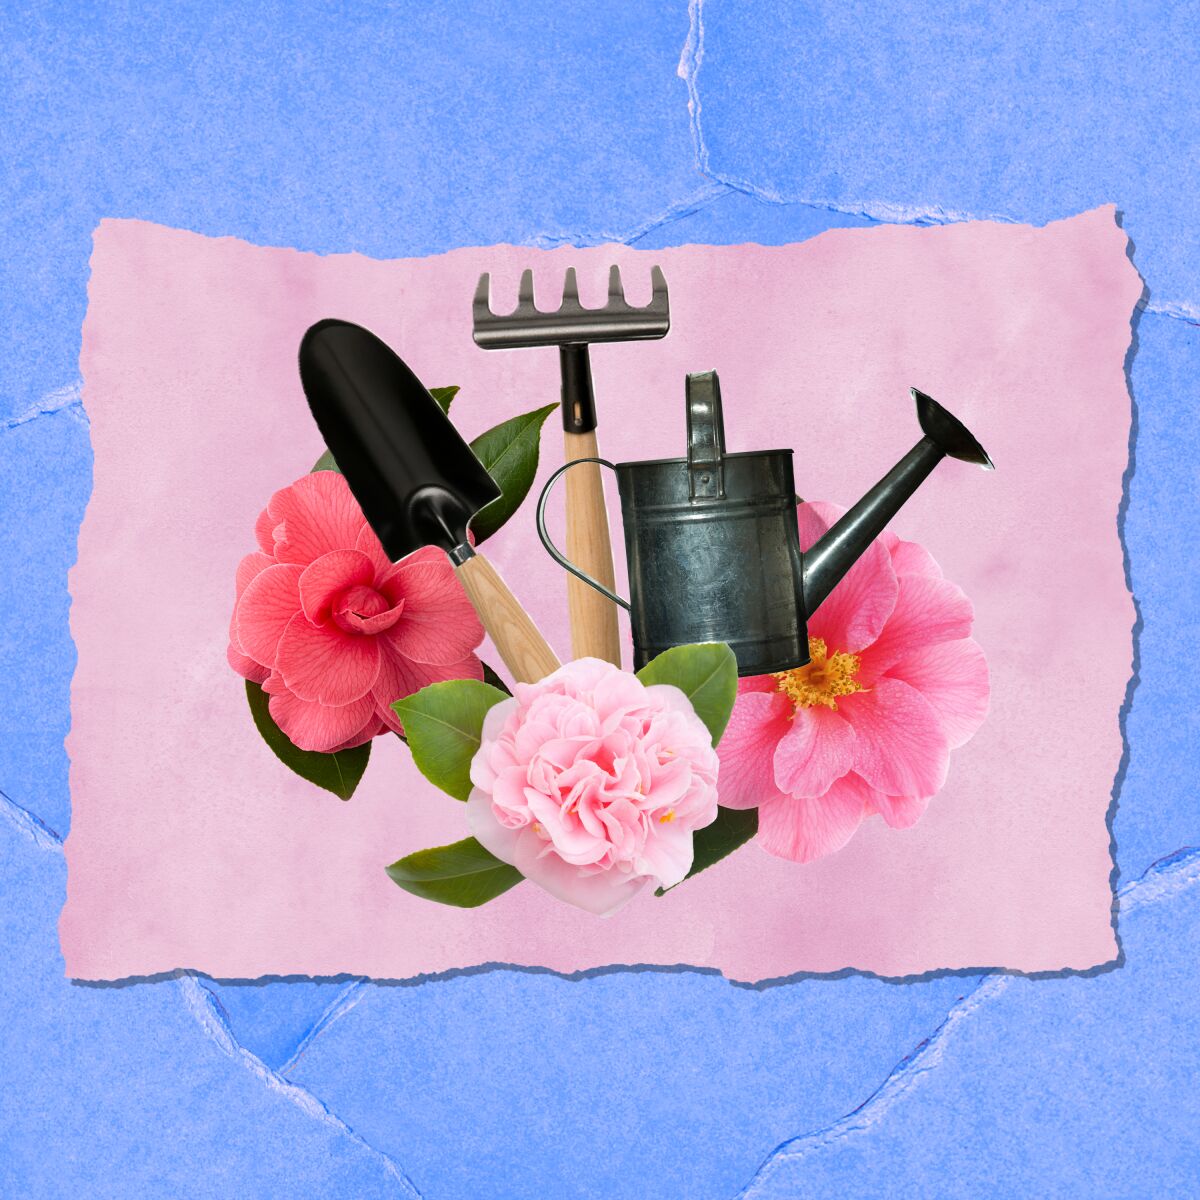 An illustration includes garden tools and three camellia flowers.